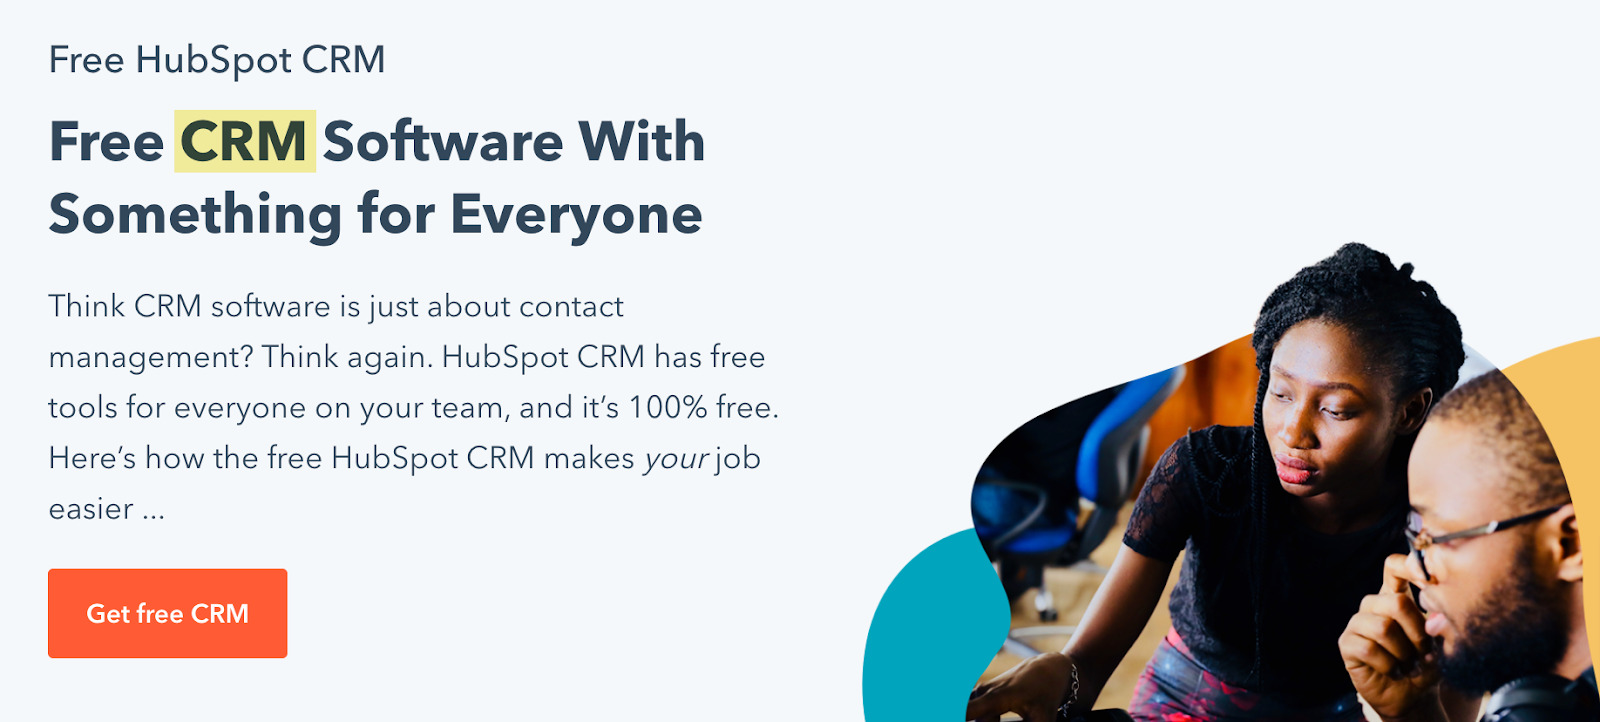 H1 on Hubspot's webpage about its CRM software